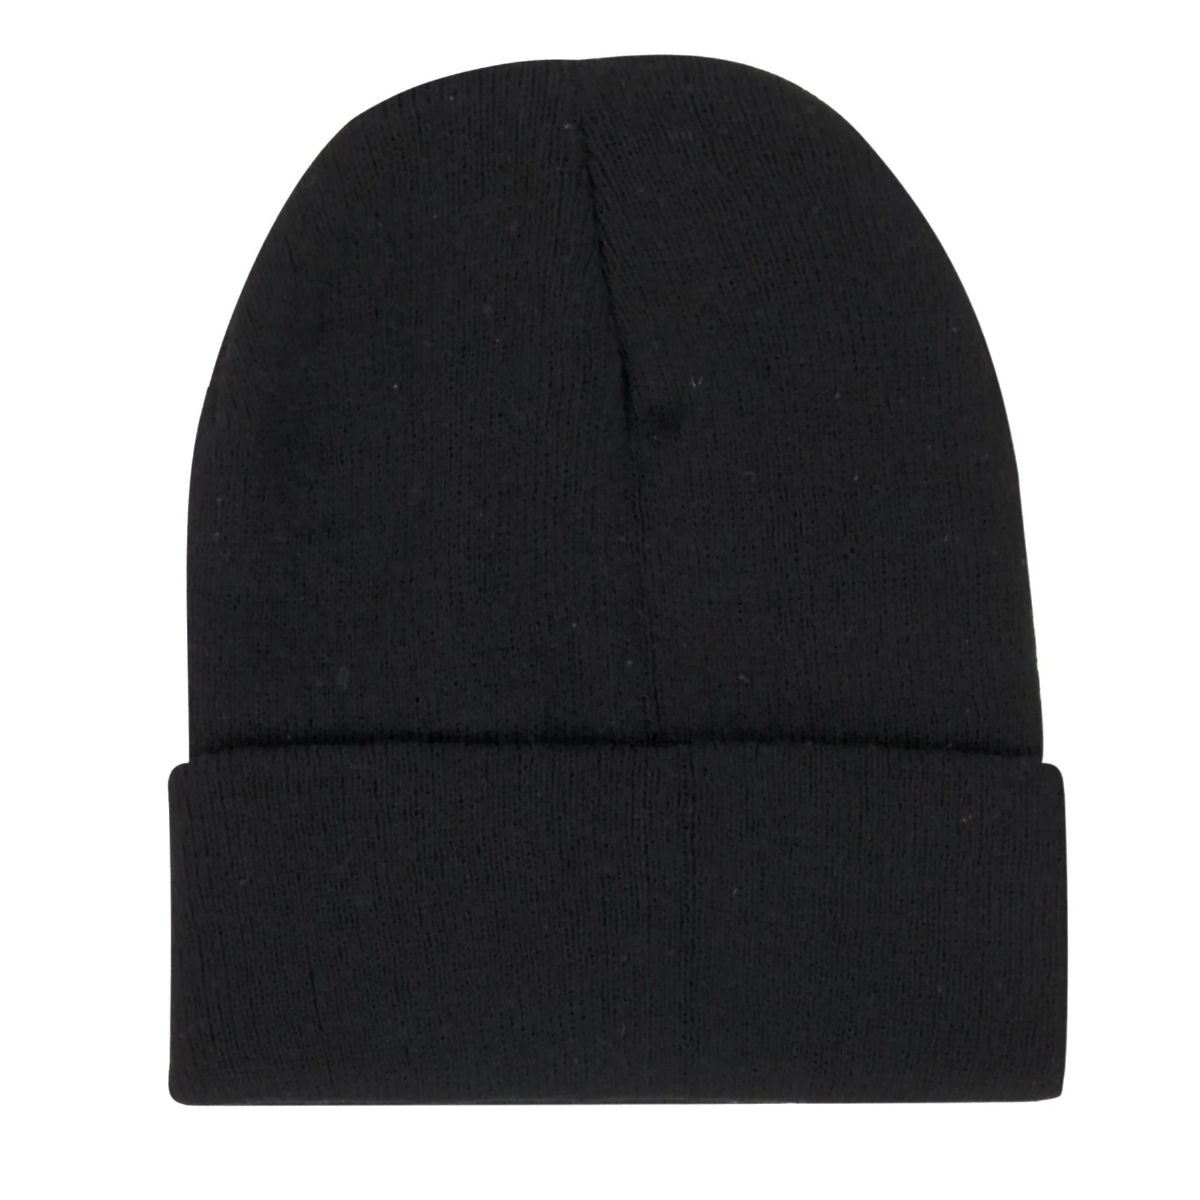 50 Pieces of Adult Knit Hat BeaniE- Black